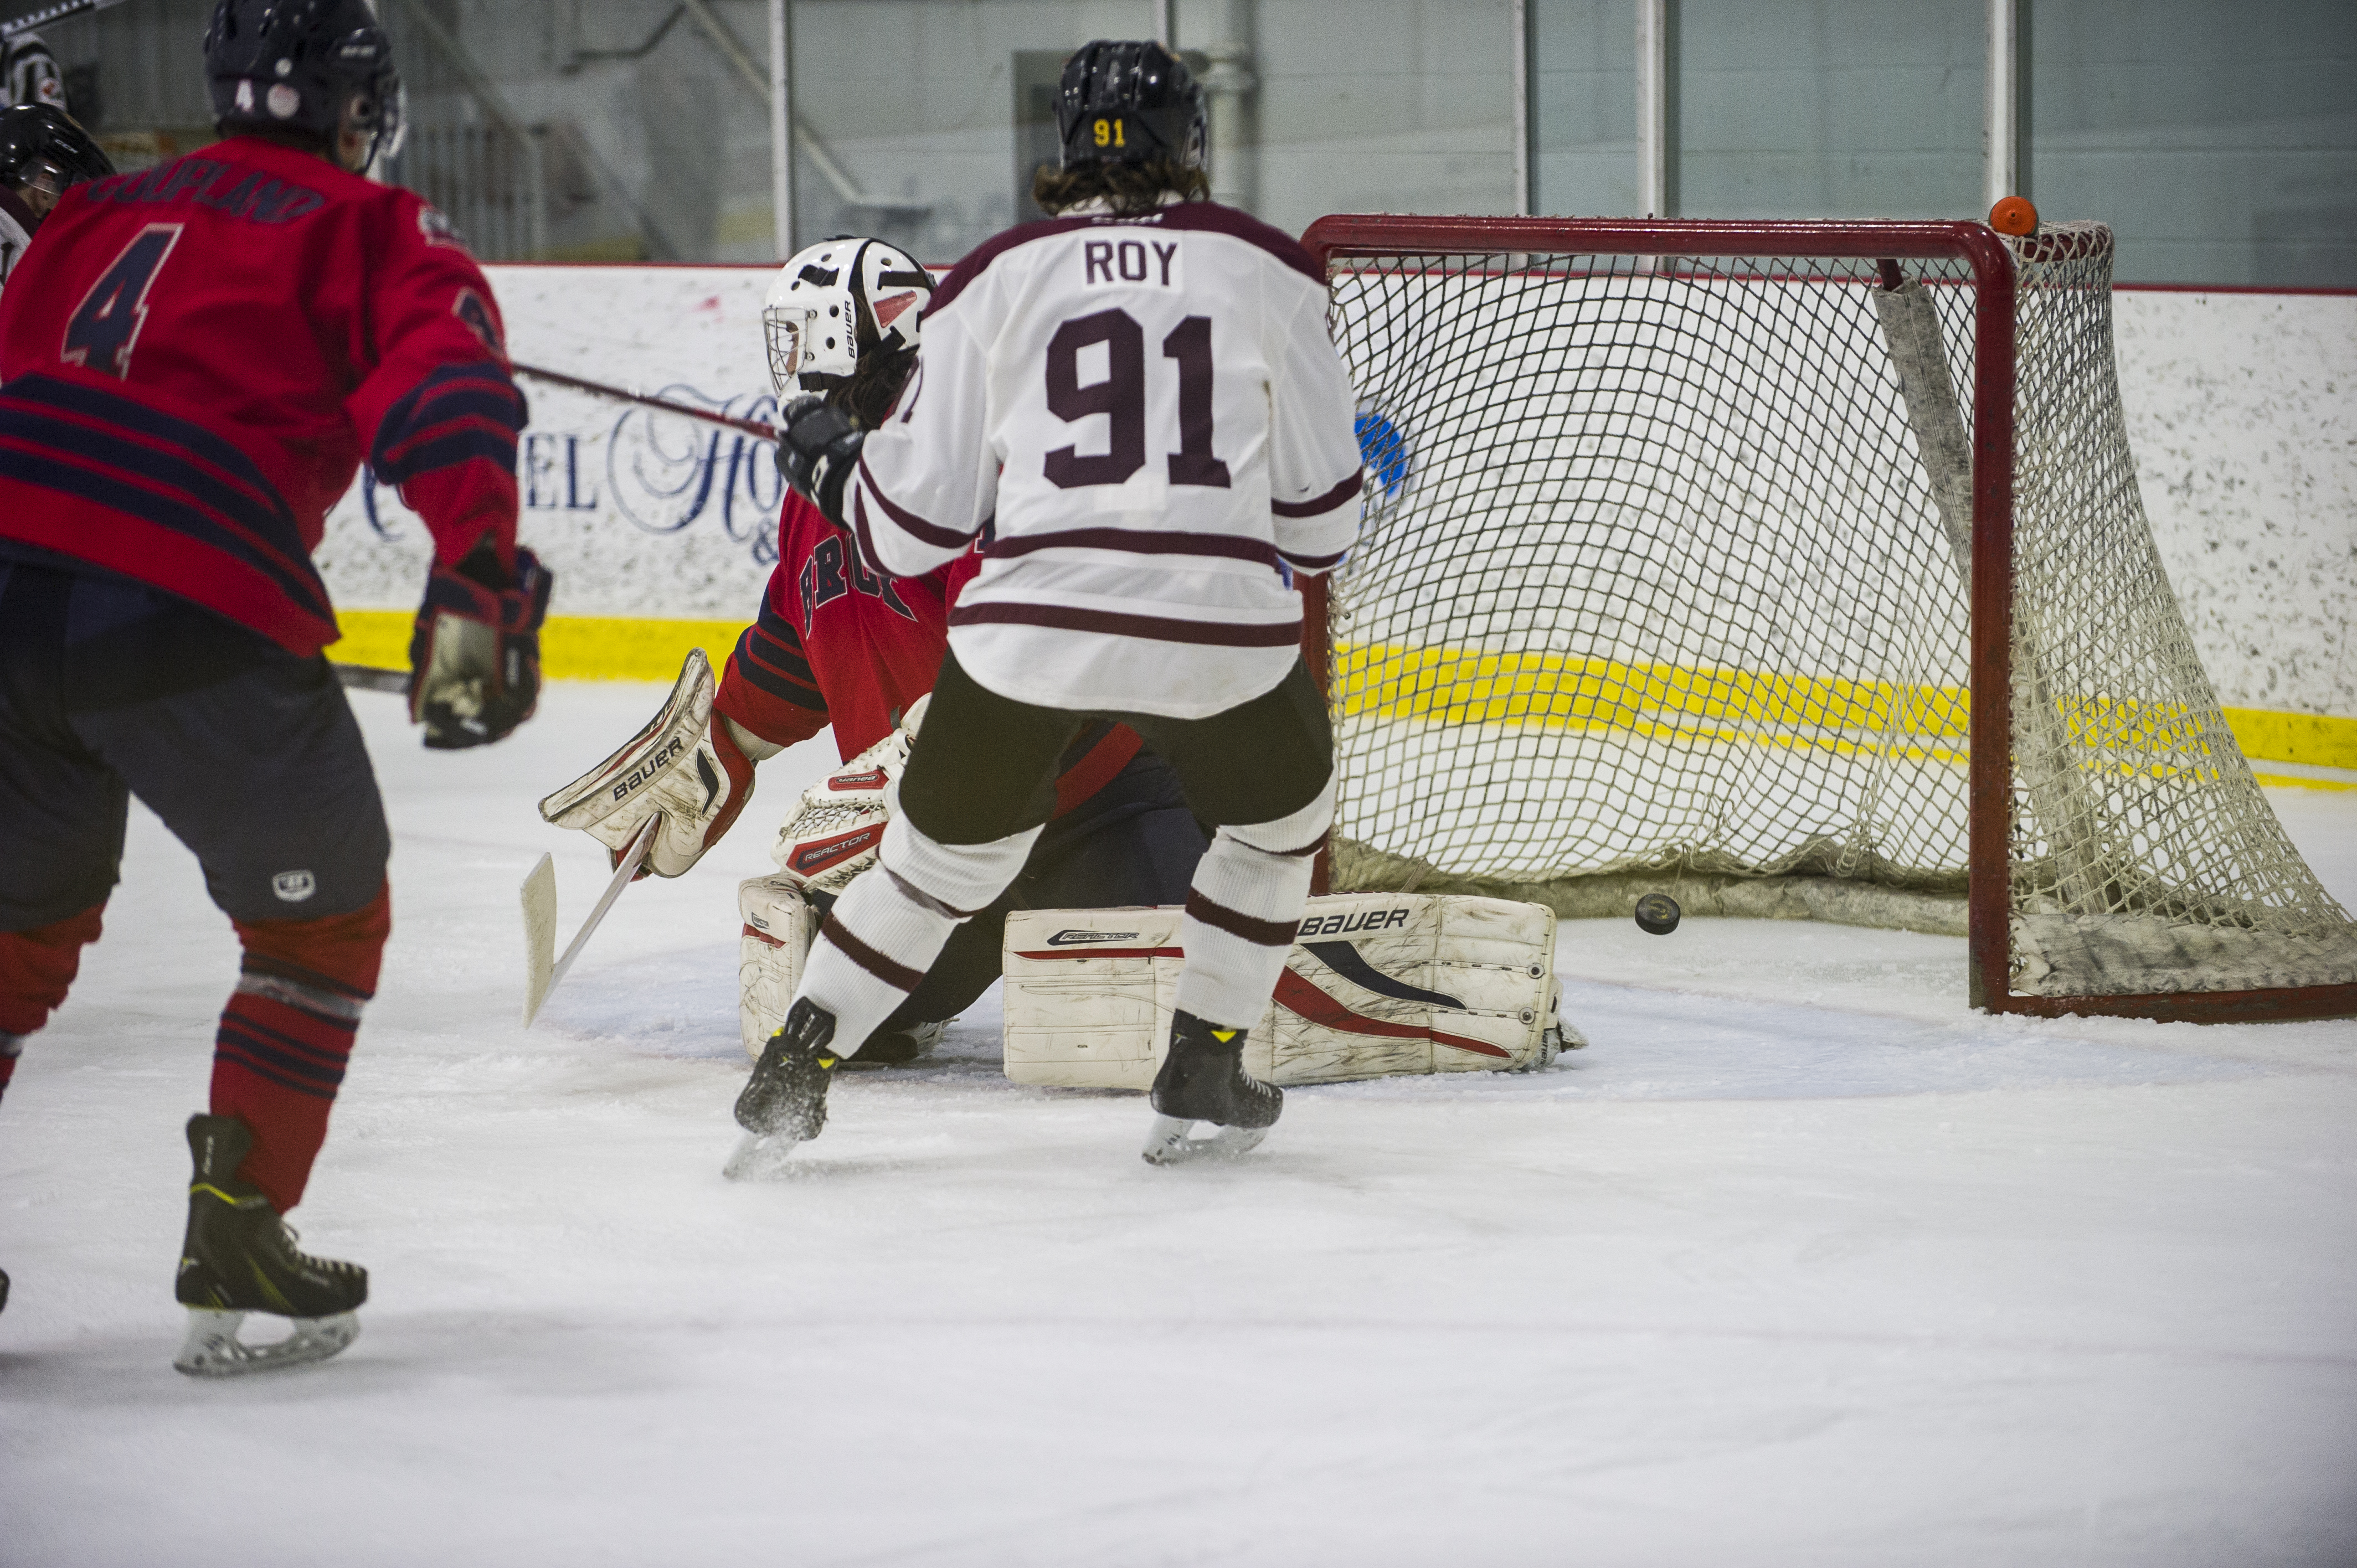 Frederic Roy of the Stingers tips in his goal during the team’s win against Brock. Photo by Andrej Ivanov.